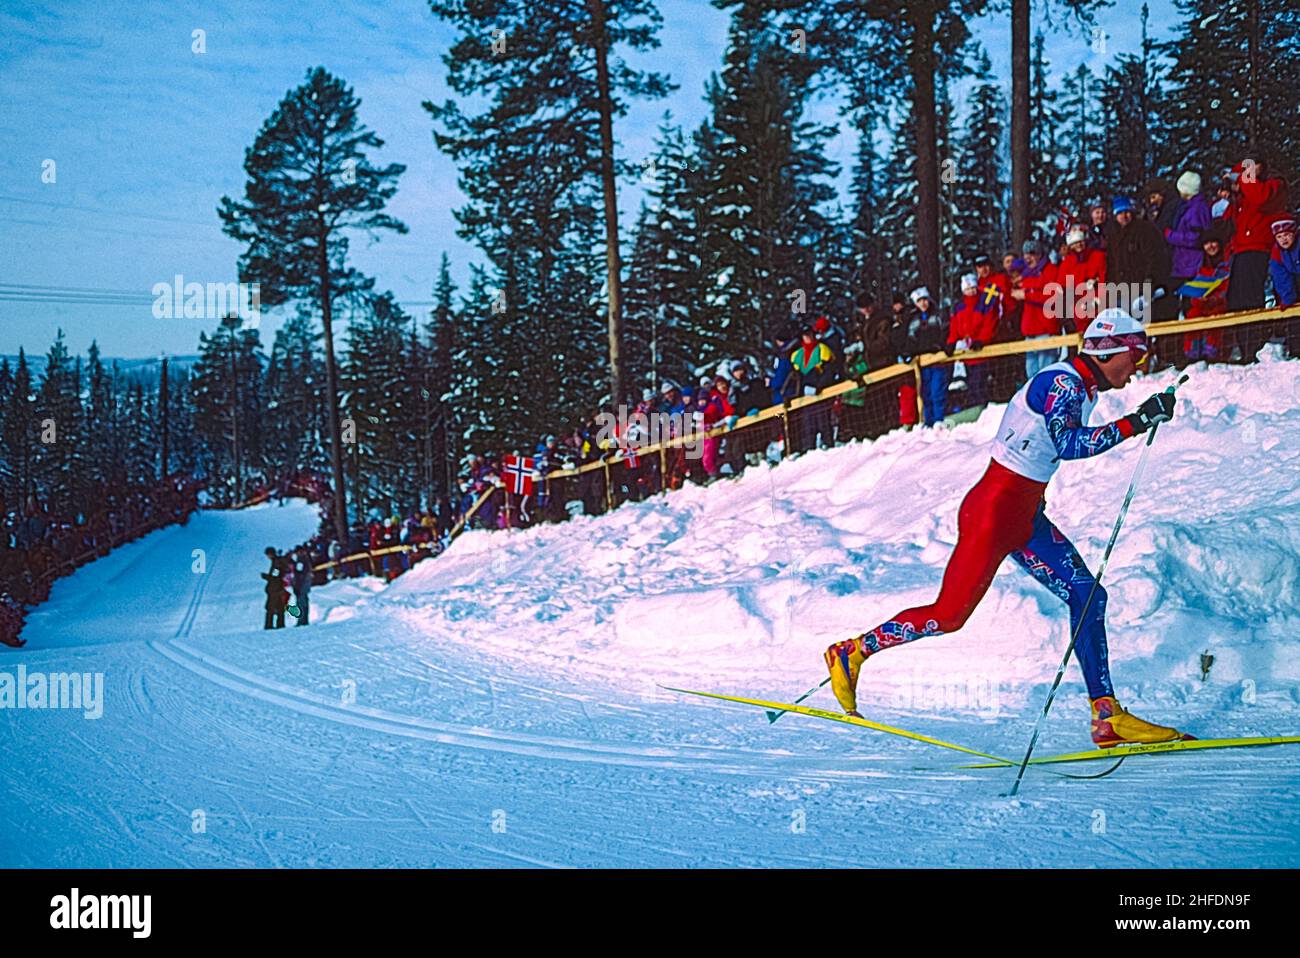 Bjorn Daehlie (NOR) wins the gold medal in the men's 10km cross country skiing at the 1994 Olympic Winter Games. Stock Photo